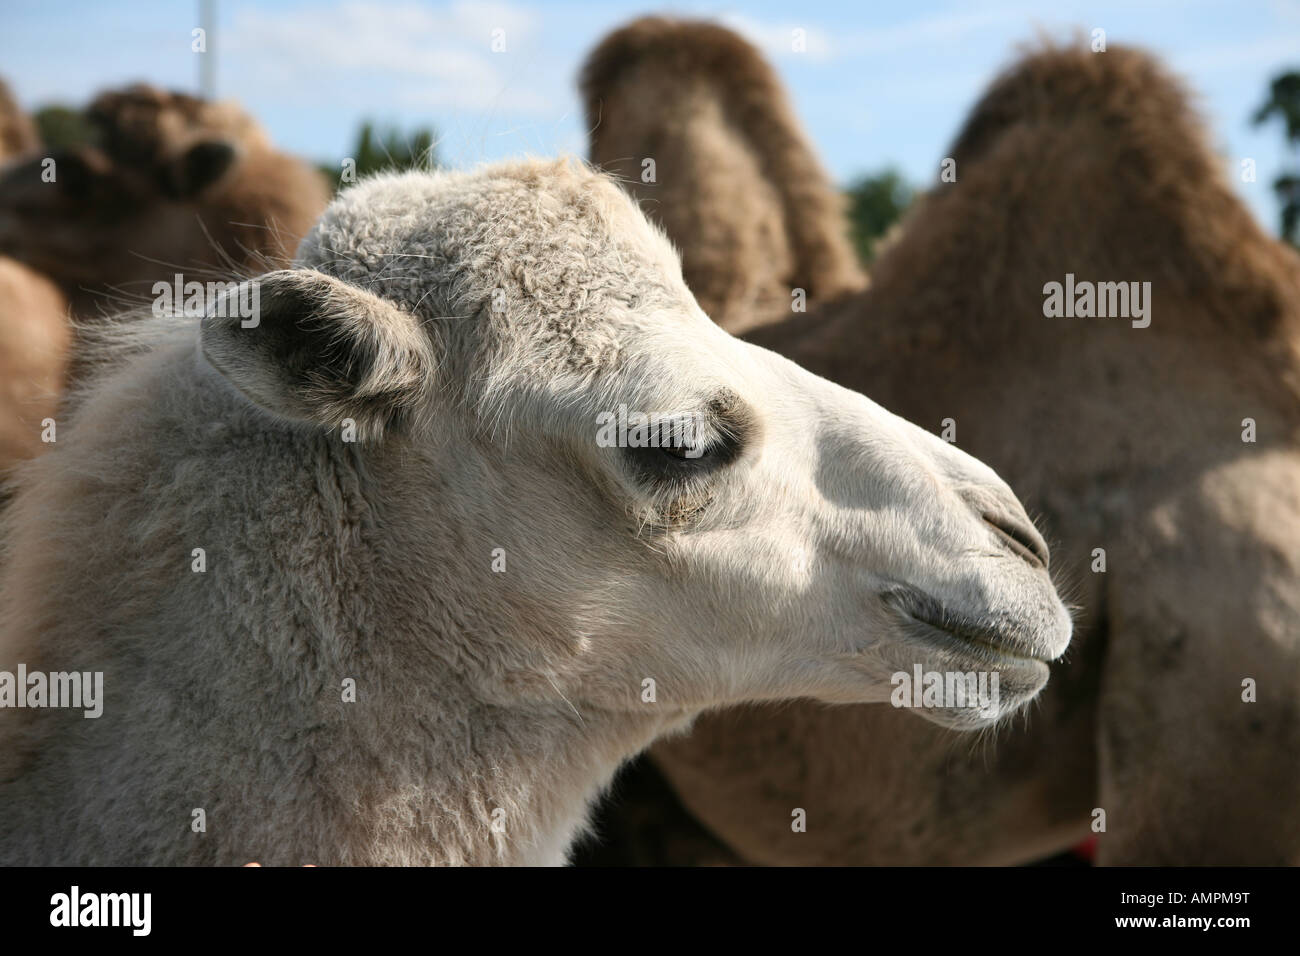 Close up of camels head with others in background in safari park Stock Photo